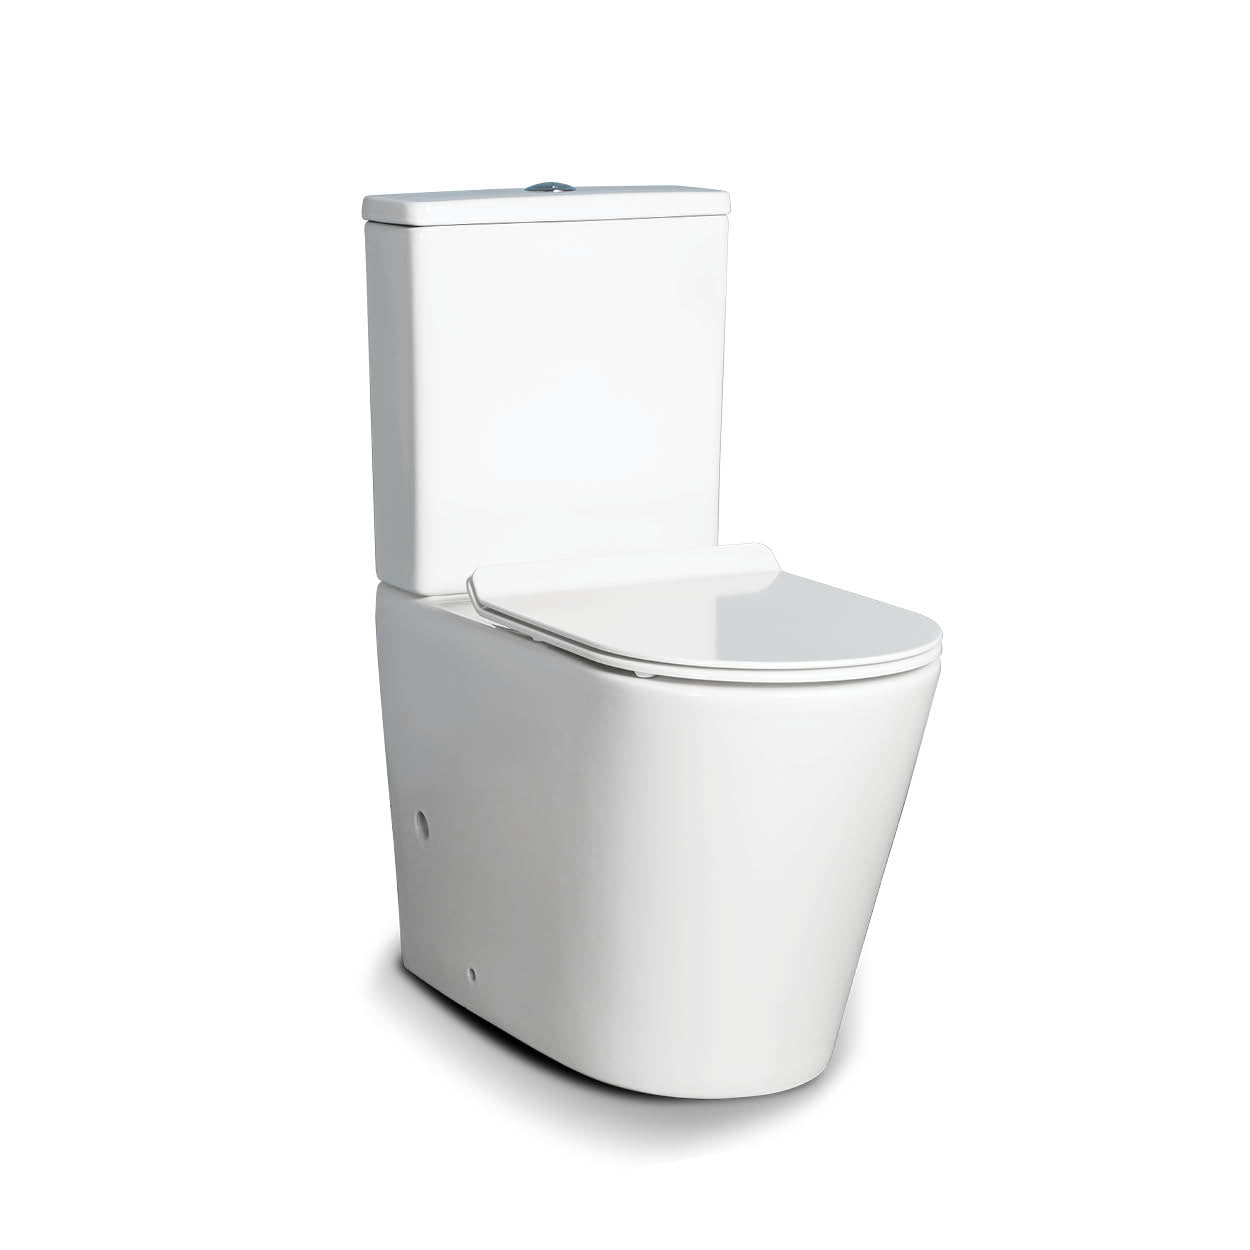 The Argyle Rimless Wall-Faced Two-Piece Toilet